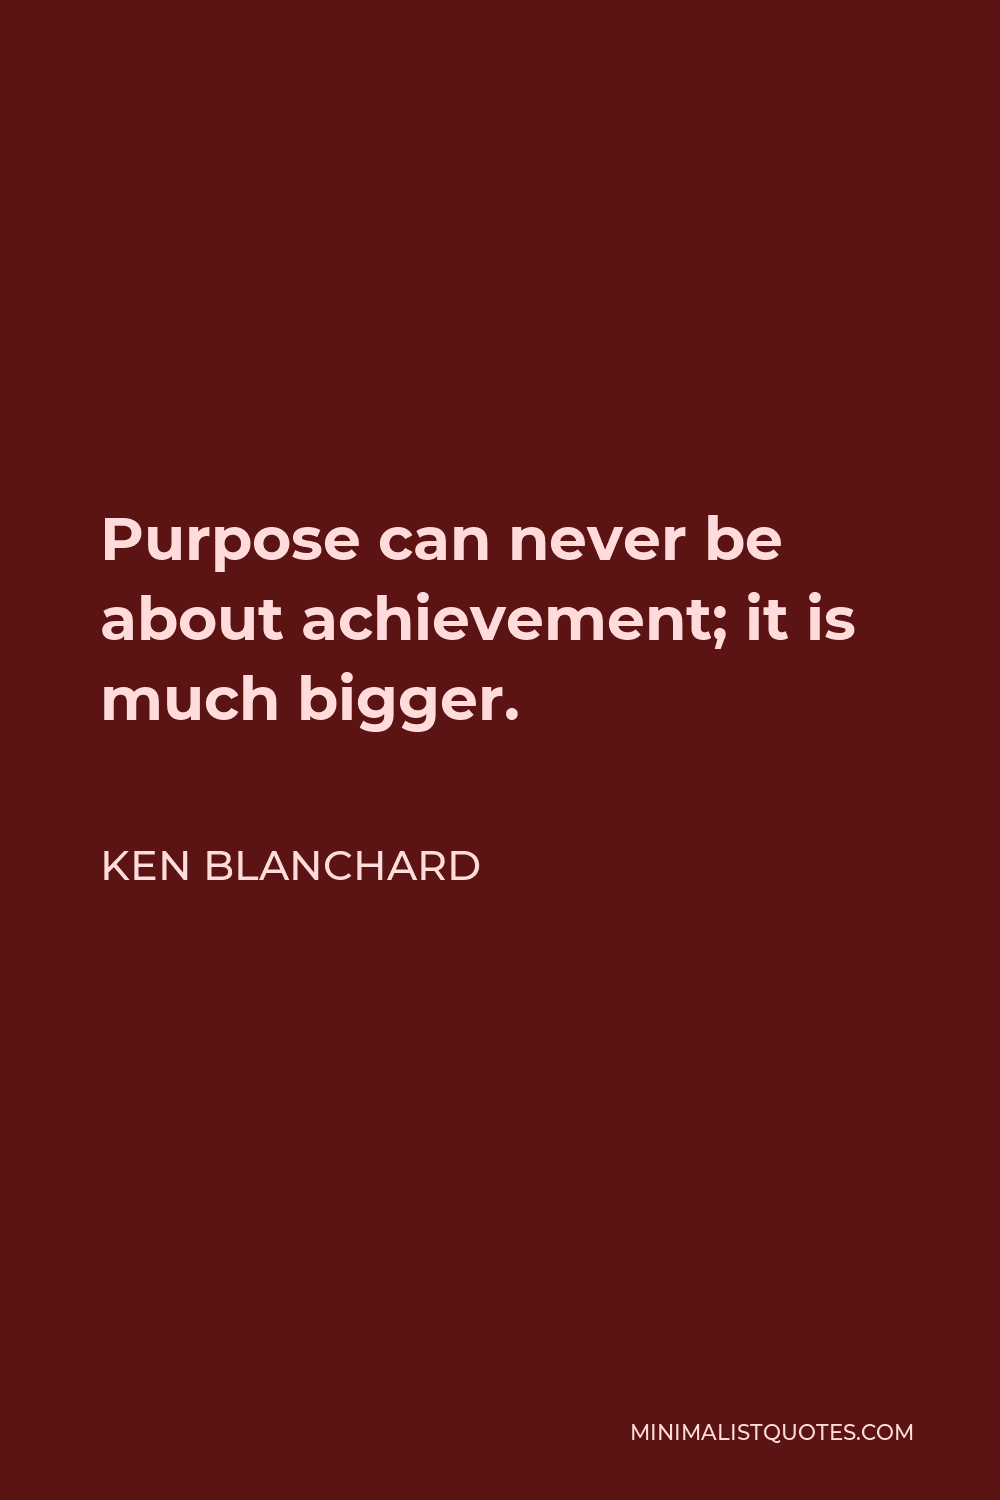 Ken Blanchard Quote - Purpose can never be about achievement; it is much bigger.